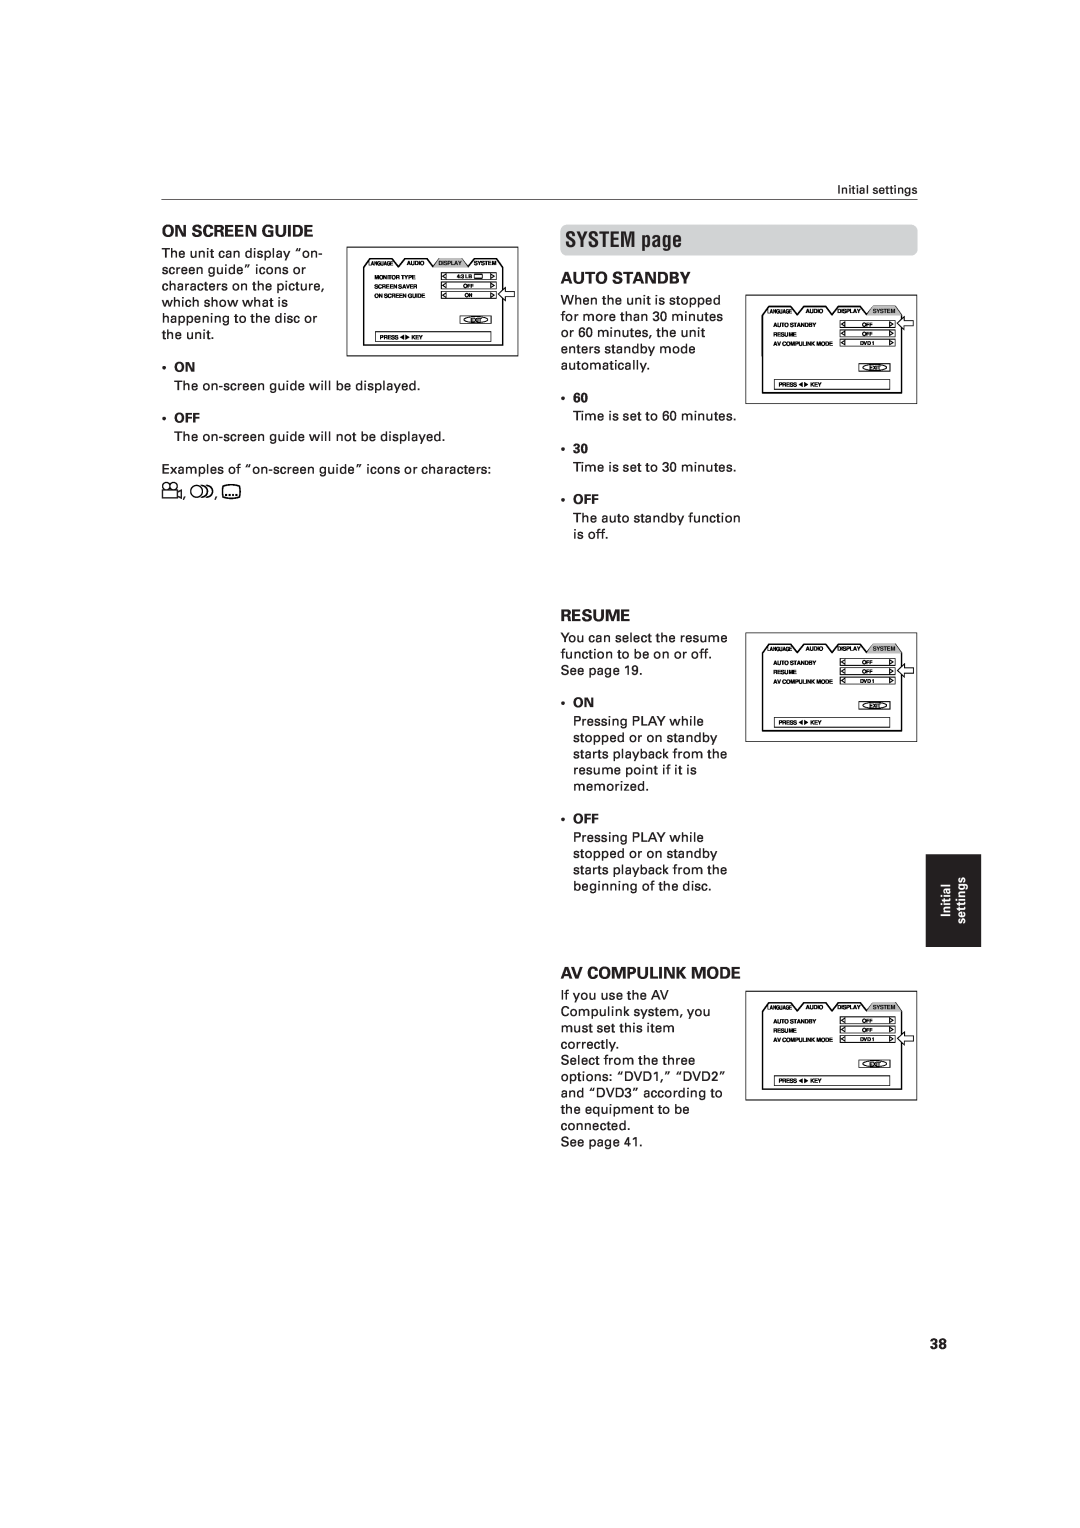 JVC XV-521BK manual SYSTEM page, On Screen Guide, Auto Standby, Resume, Av Compulink Mode 